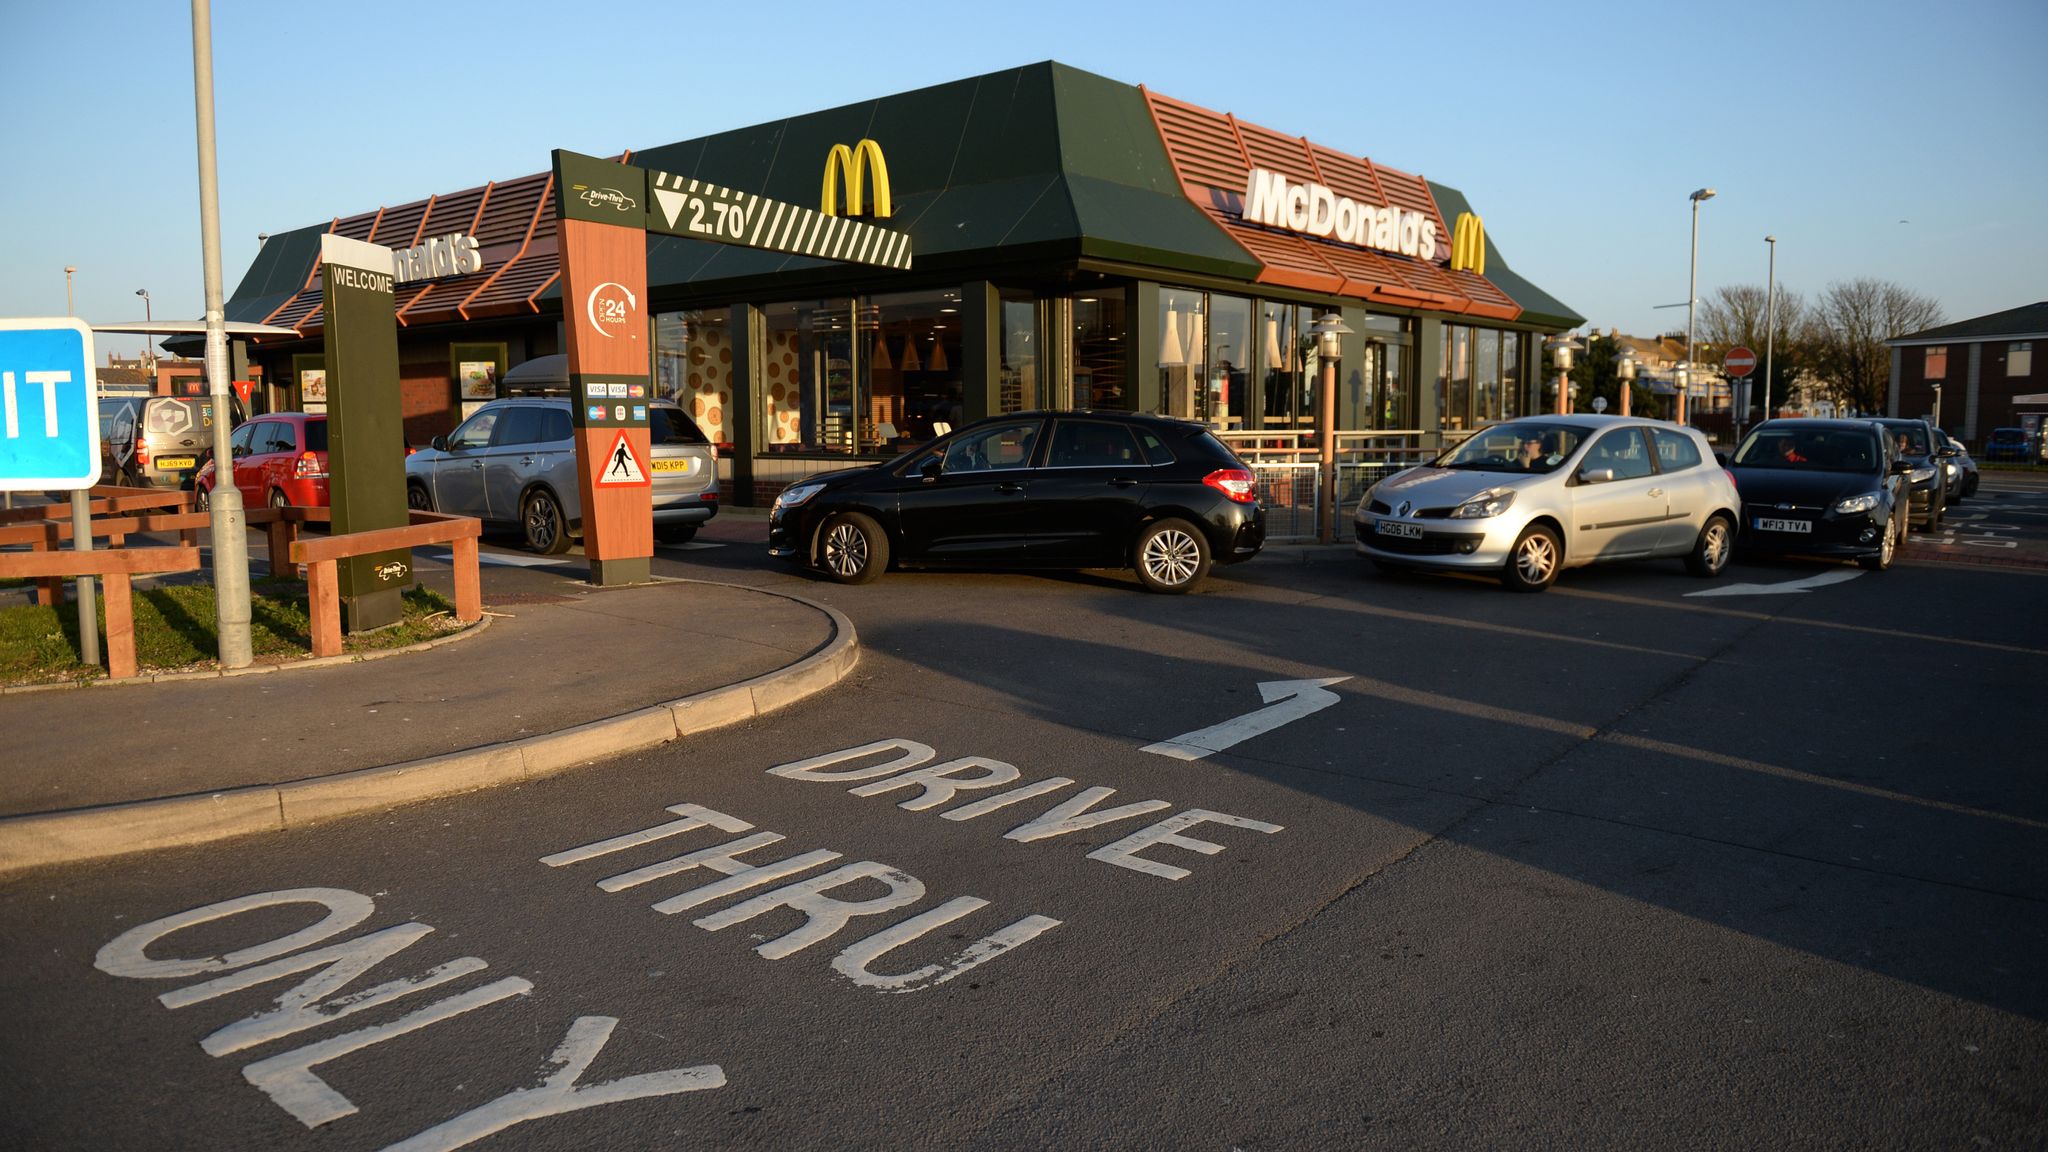 The picture shows the outside of a McDonald's restaurant. Cars are queuing around the side of the restaurant, and on the road in the foreground, it reads "Drive thru only".